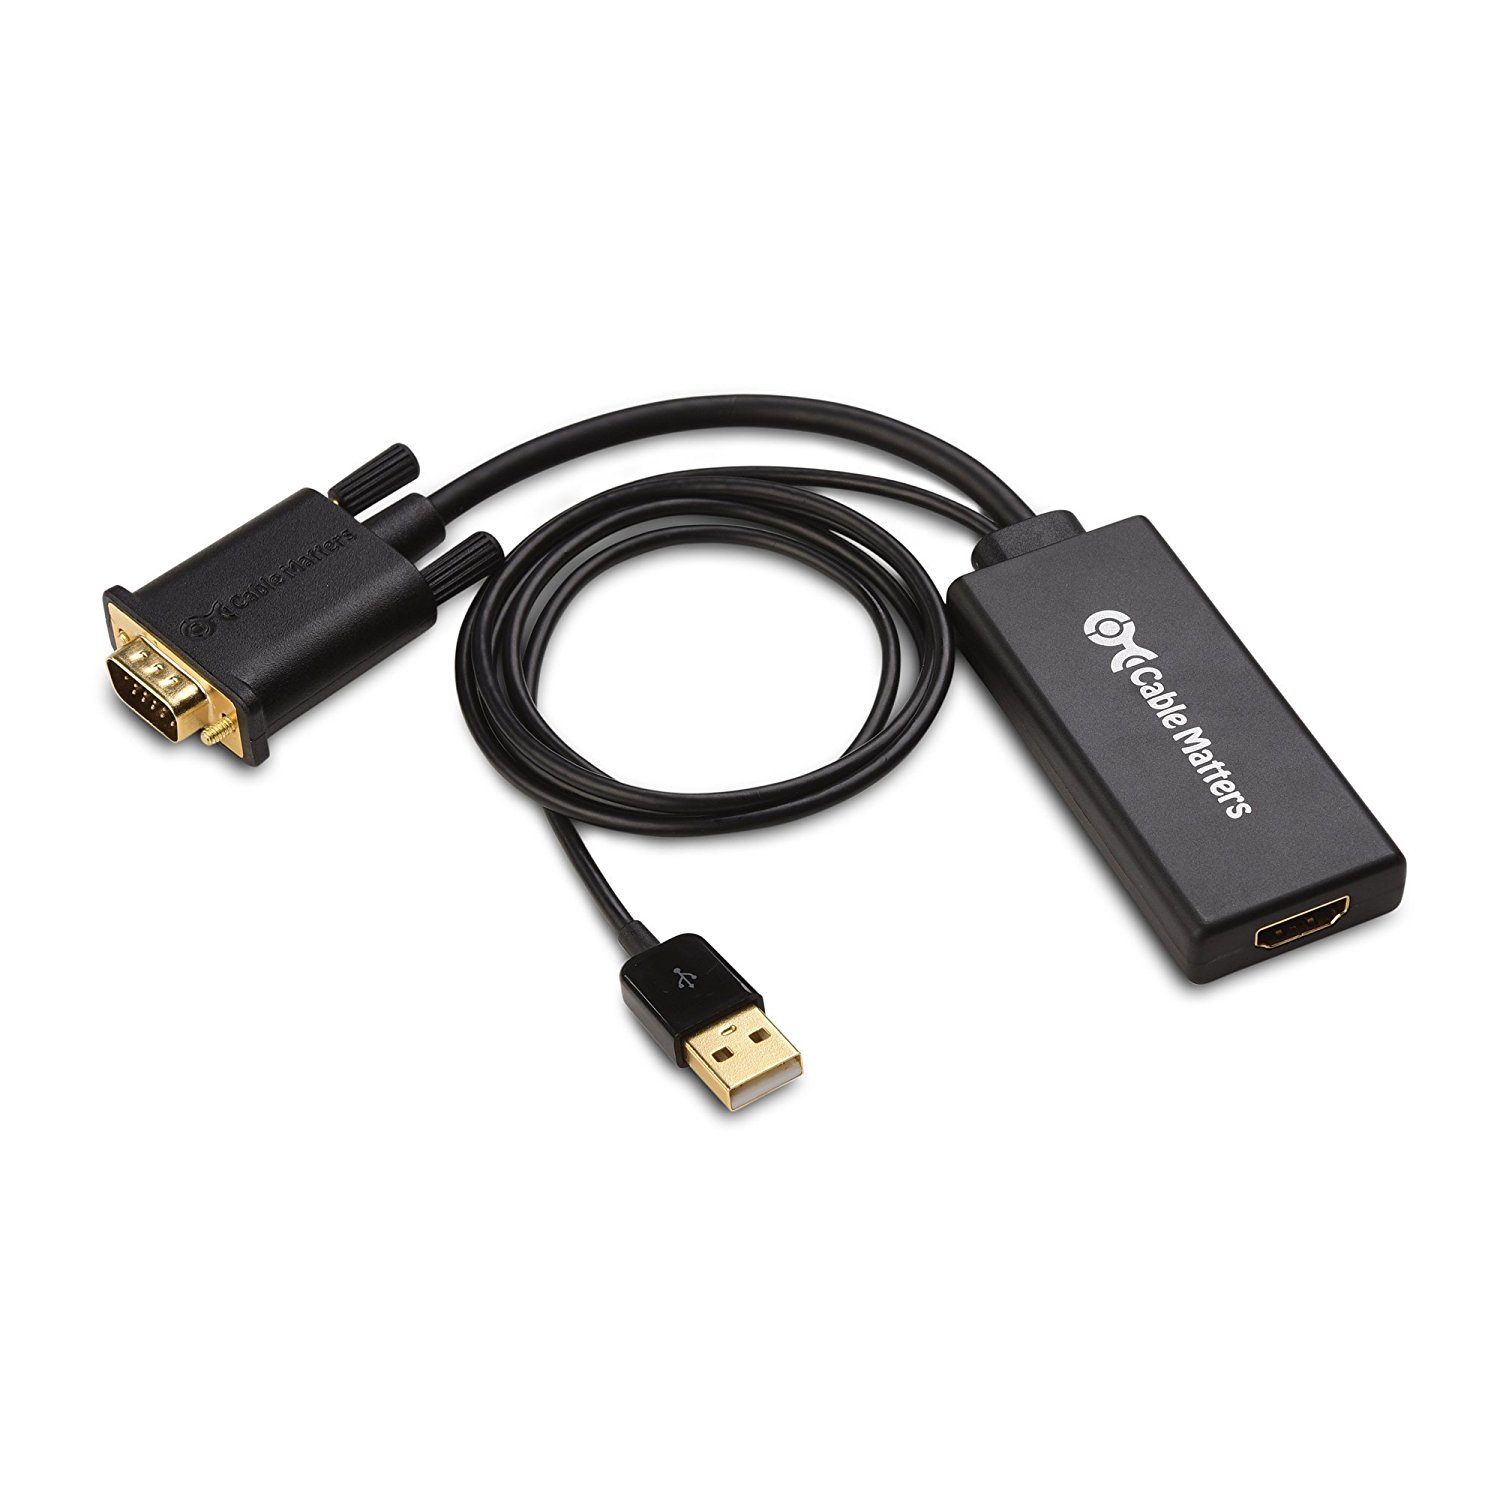 Cable Matters VGA to HDMI Converter (VGA to HDMI Adapter) with Audio Support - image 2 of 4